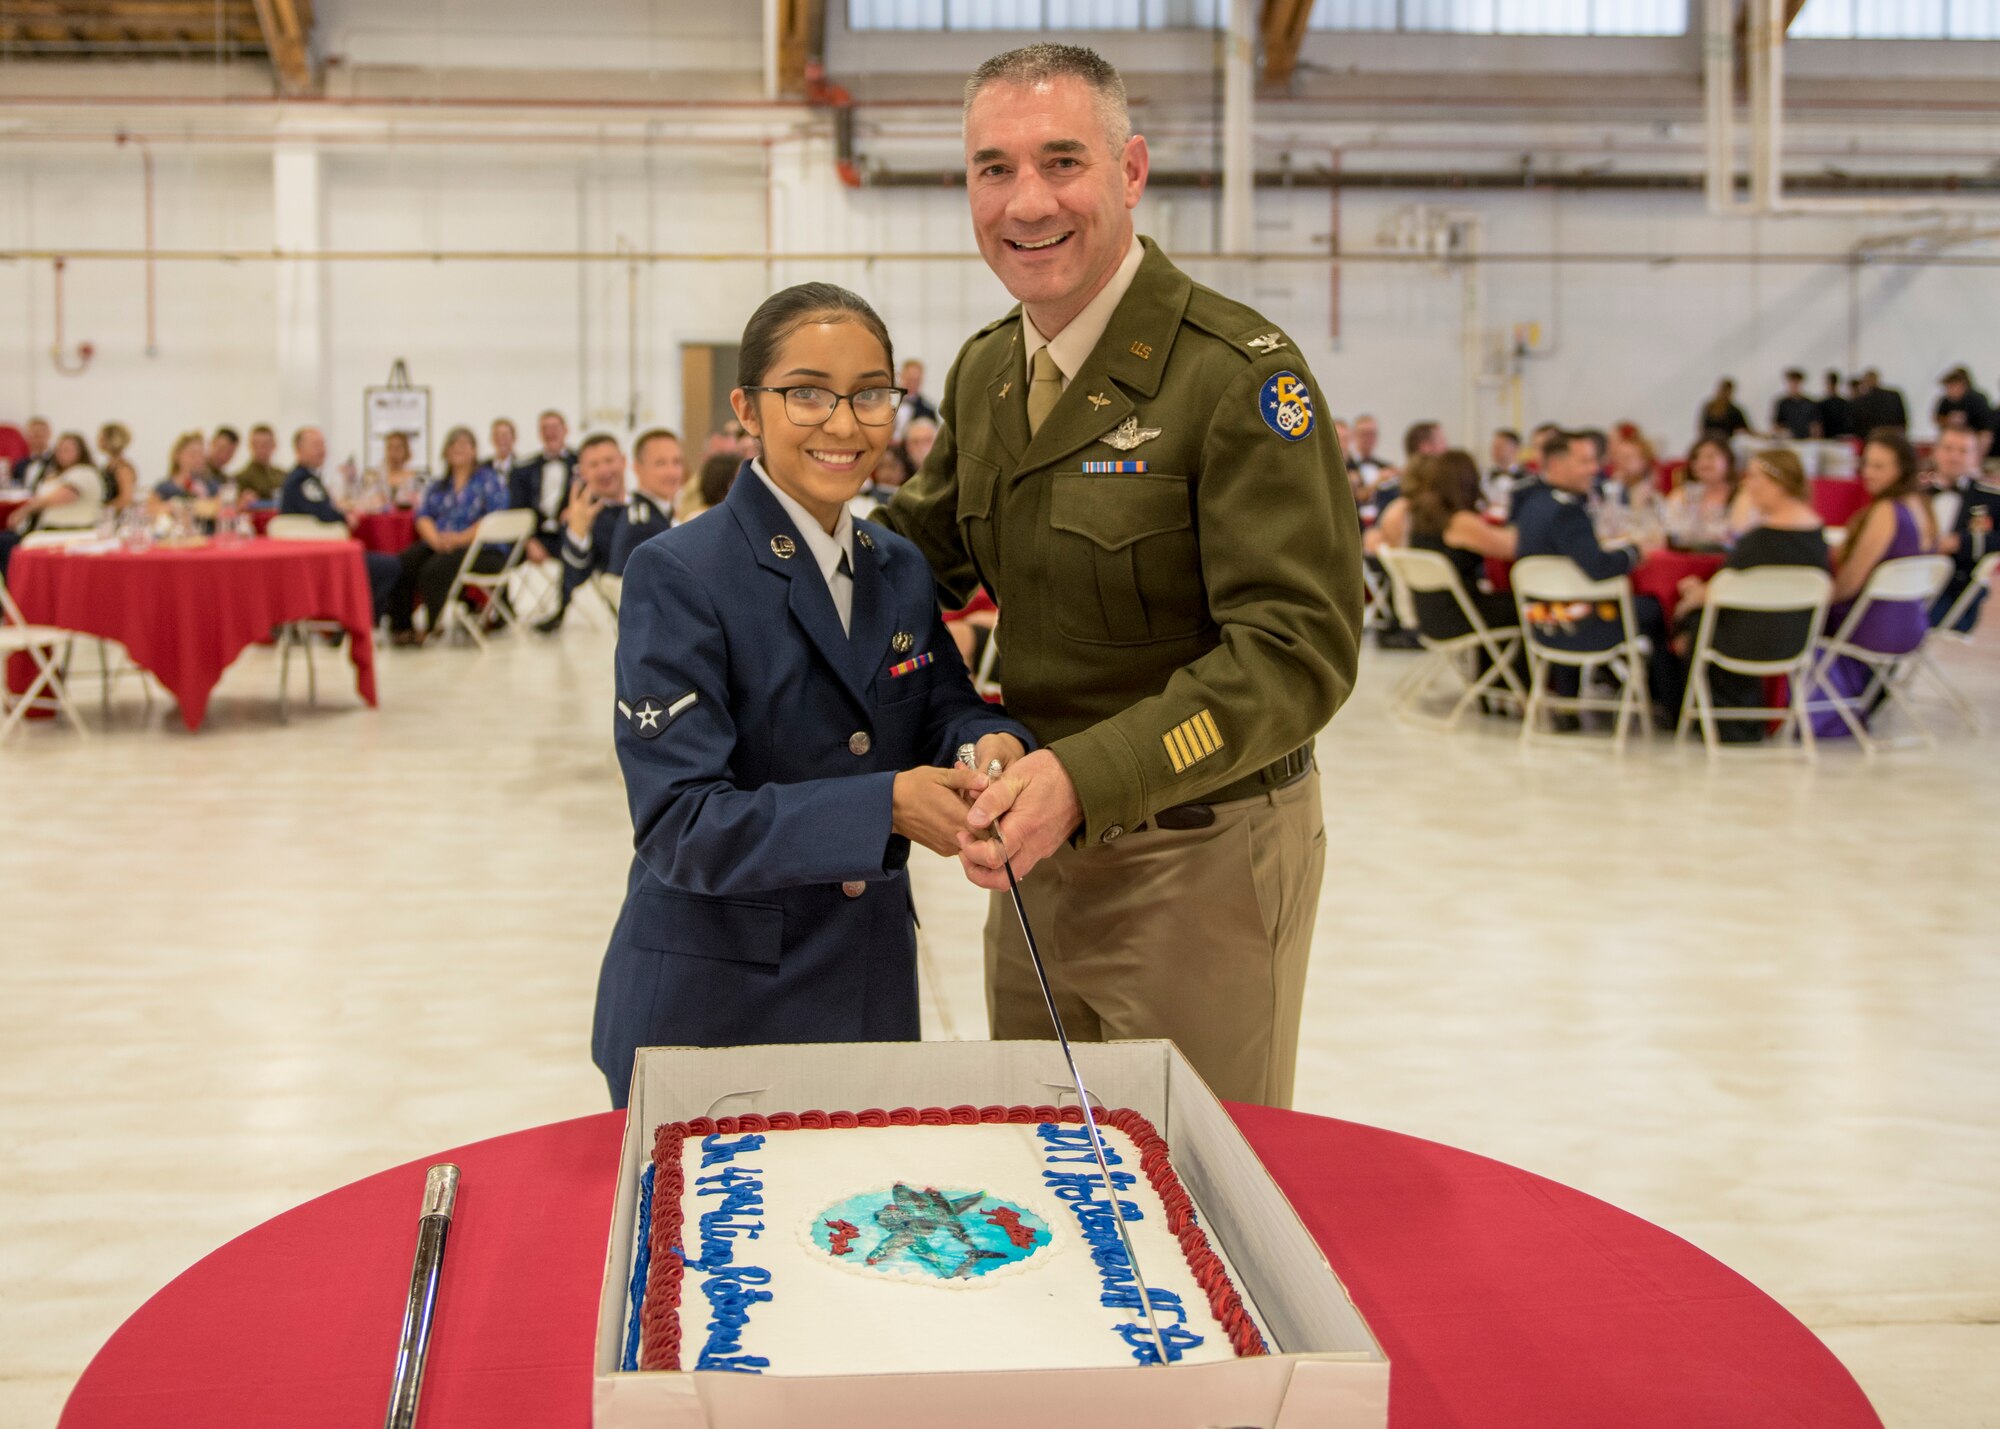 Col. Joseph Campo, 49th Wing commander, and Airman Breauna Sierra, 49th Logistics Readiness Squadron customer service Airman, cut the first piece of cake at the Air Force Ball, Sept. 14, 2019, on Holloman Air Force Base, N.M. At the Air Force Ball, it is tradition for the highest-ranking member and lowest-ranking member to cut the first piece of cake, symbolizing the passing of knowledge and inspiration from one generation to the next. (U.S. Air Force photo by Airman 1st Class Kindra Stewart)